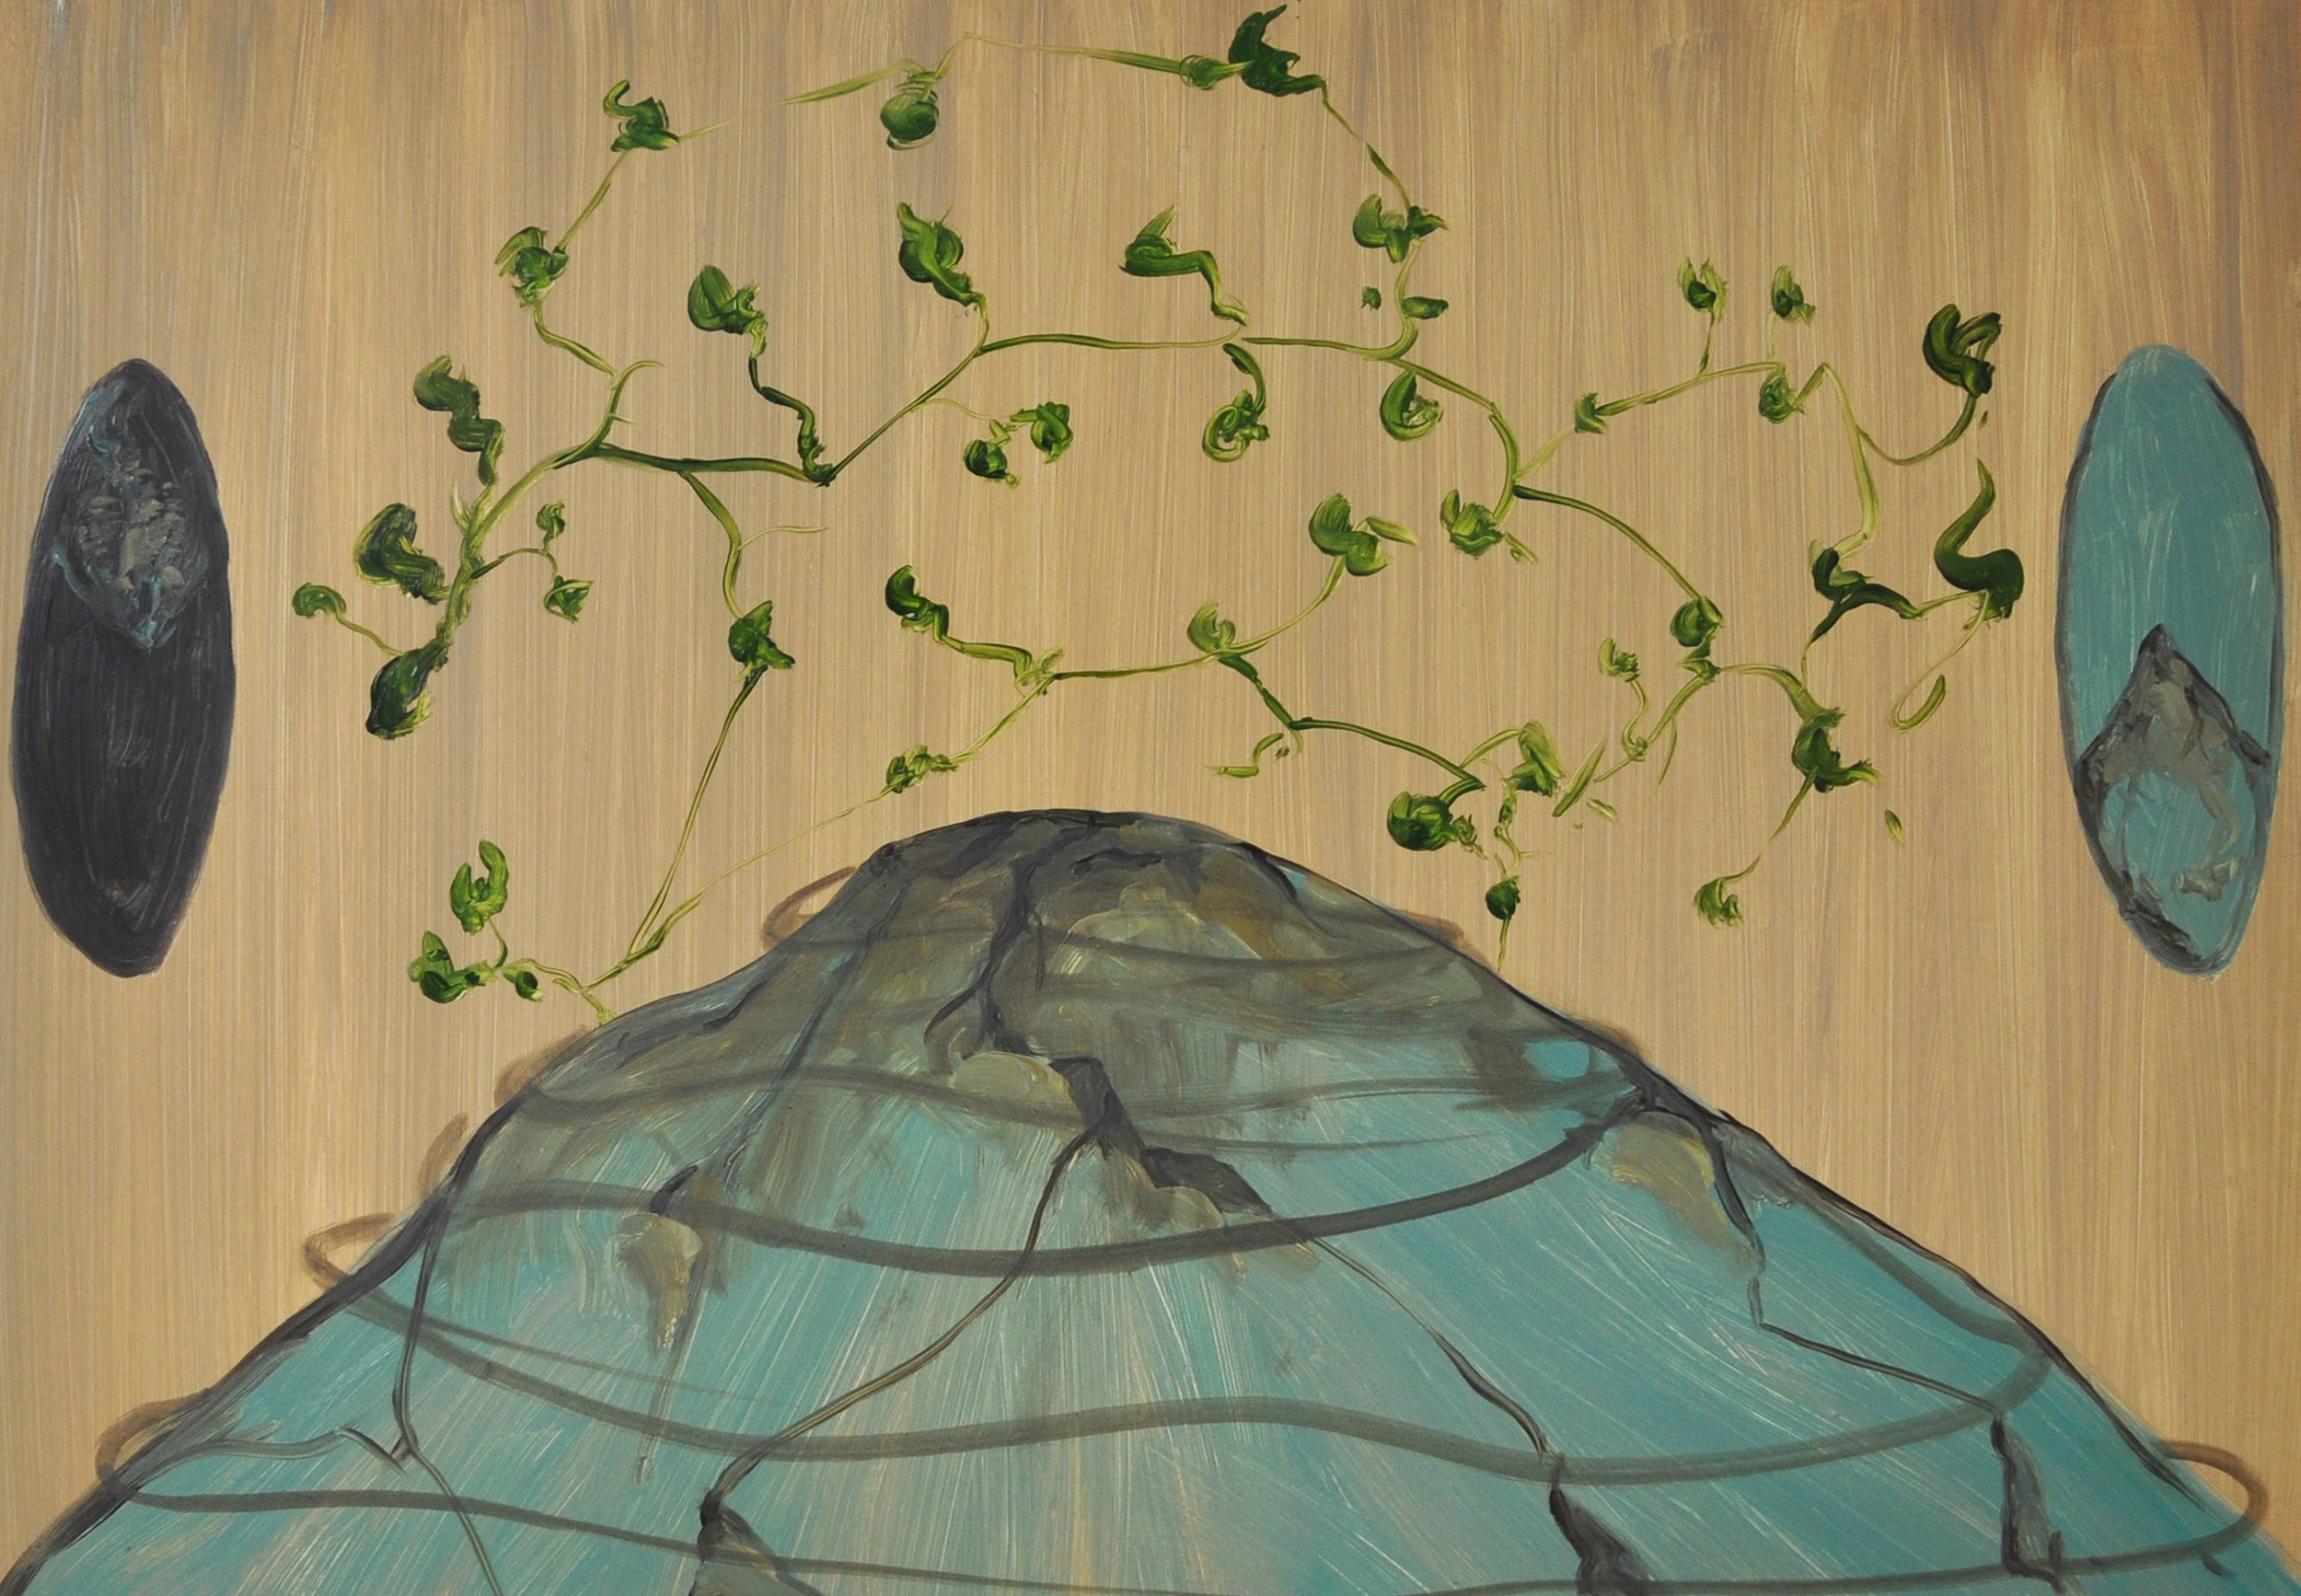 Surface to Surface, 2010, Oil on cotton, 50 x 70 cm